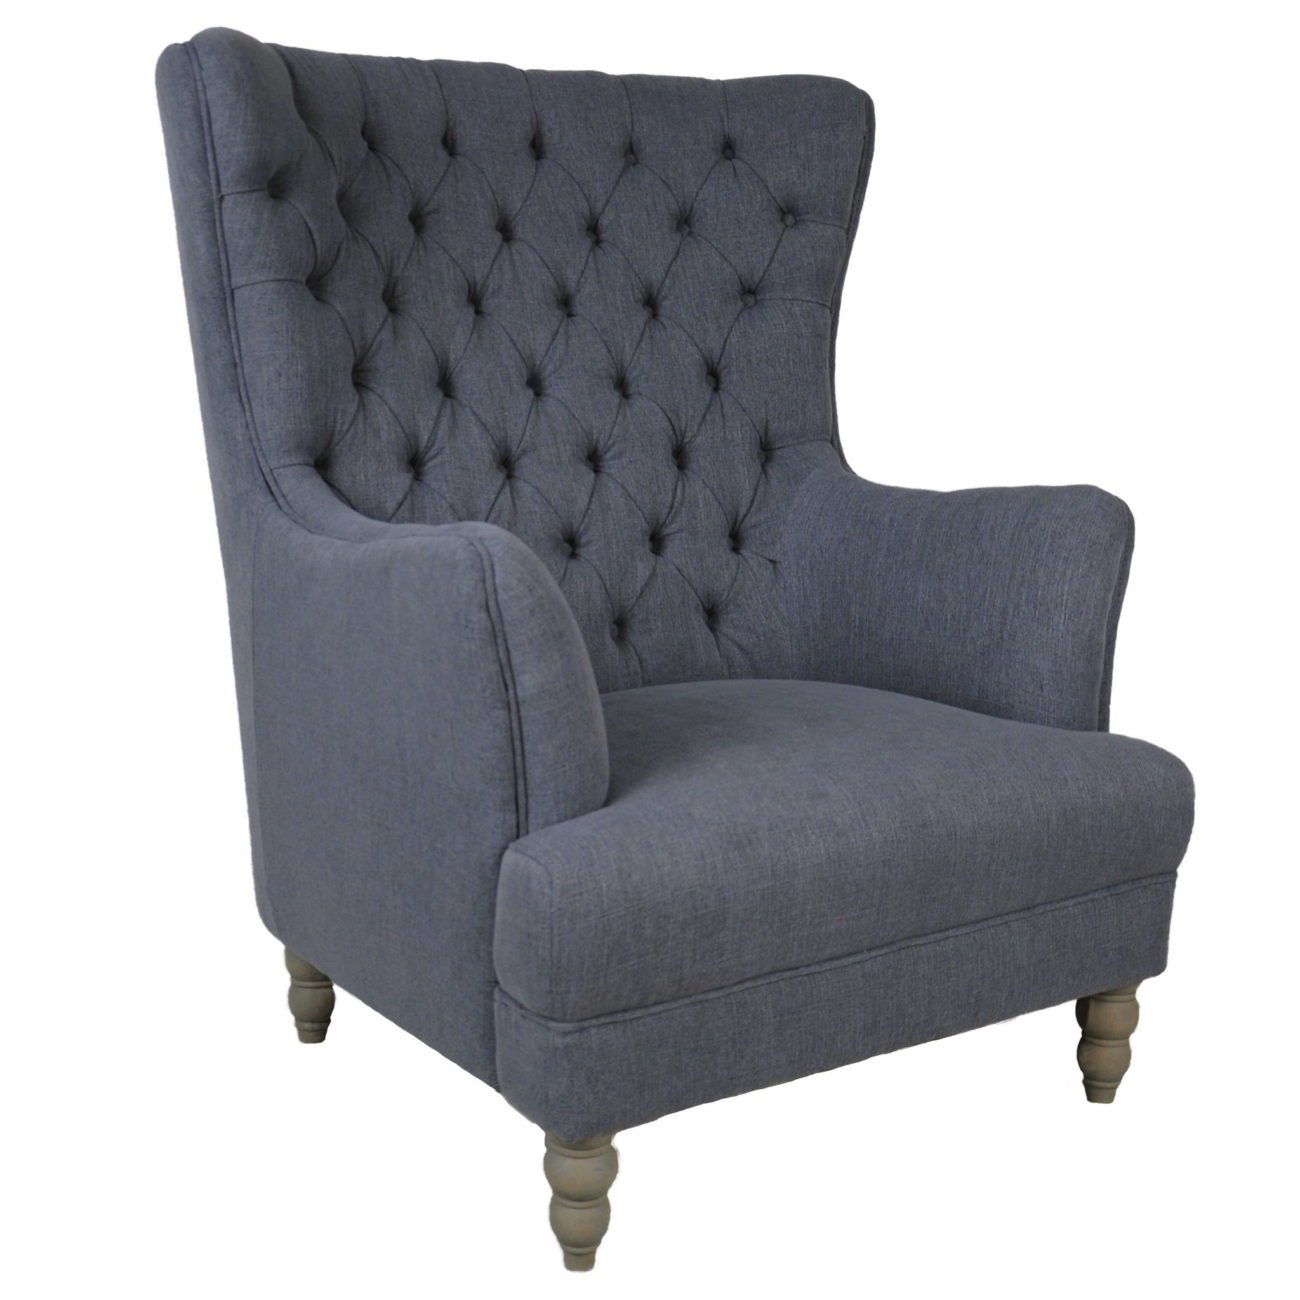 Stockwell-Button-Tufted-Oversized-Wing-Back-Club-Chair.